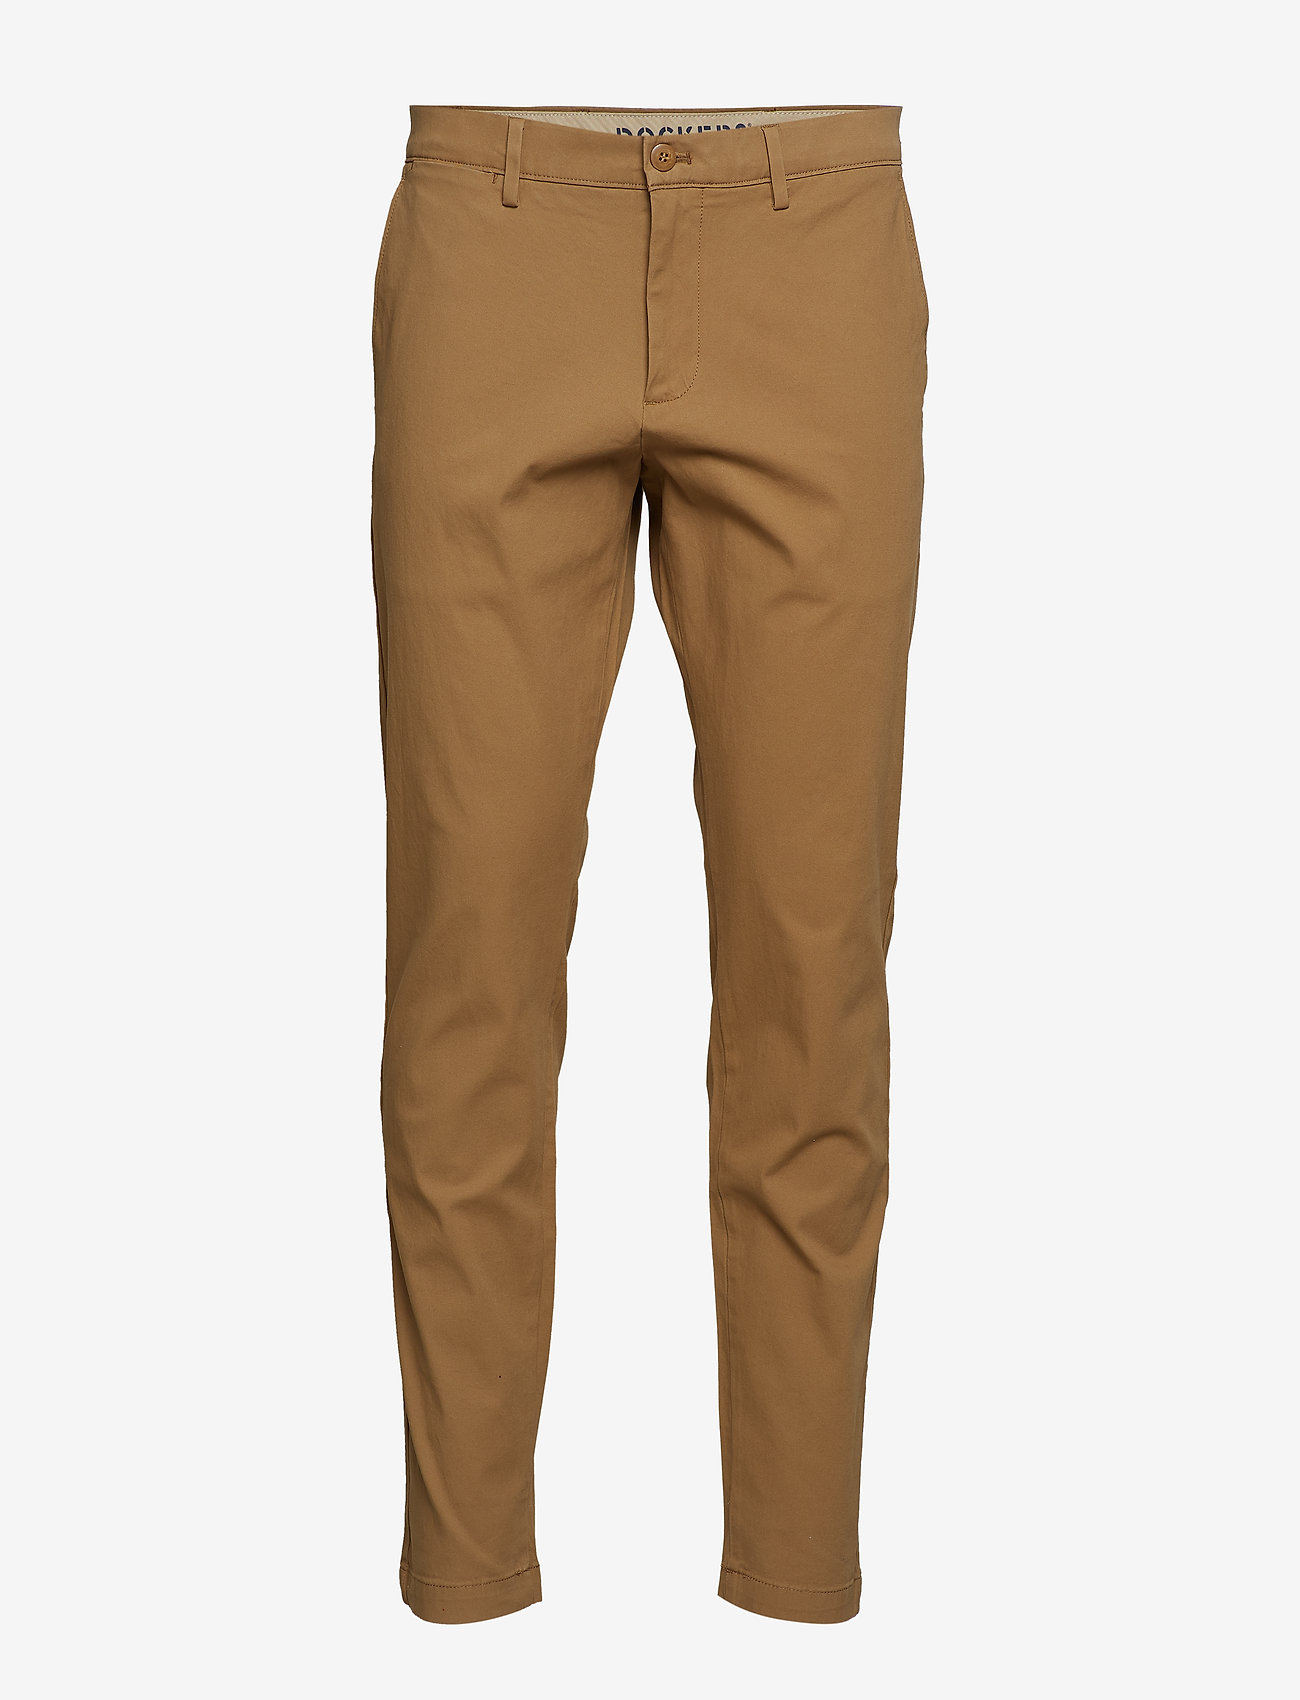 Dockers - MOTION CHINO TAPER - suit trousers - neutrals - 0